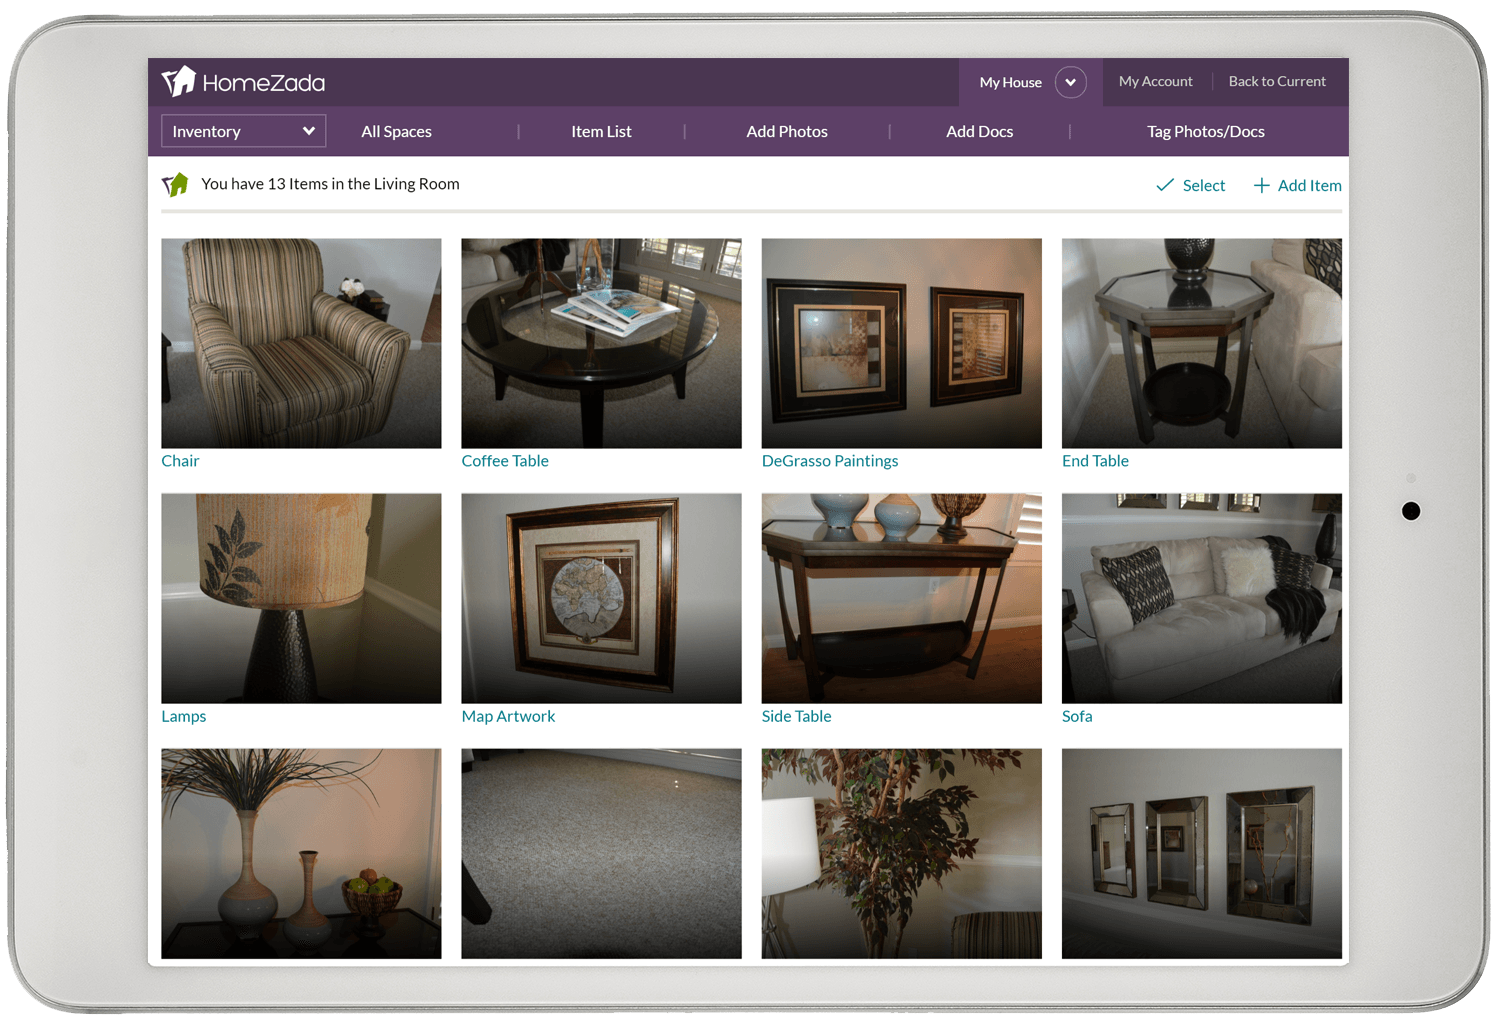 Homezada home inventory gallery of items